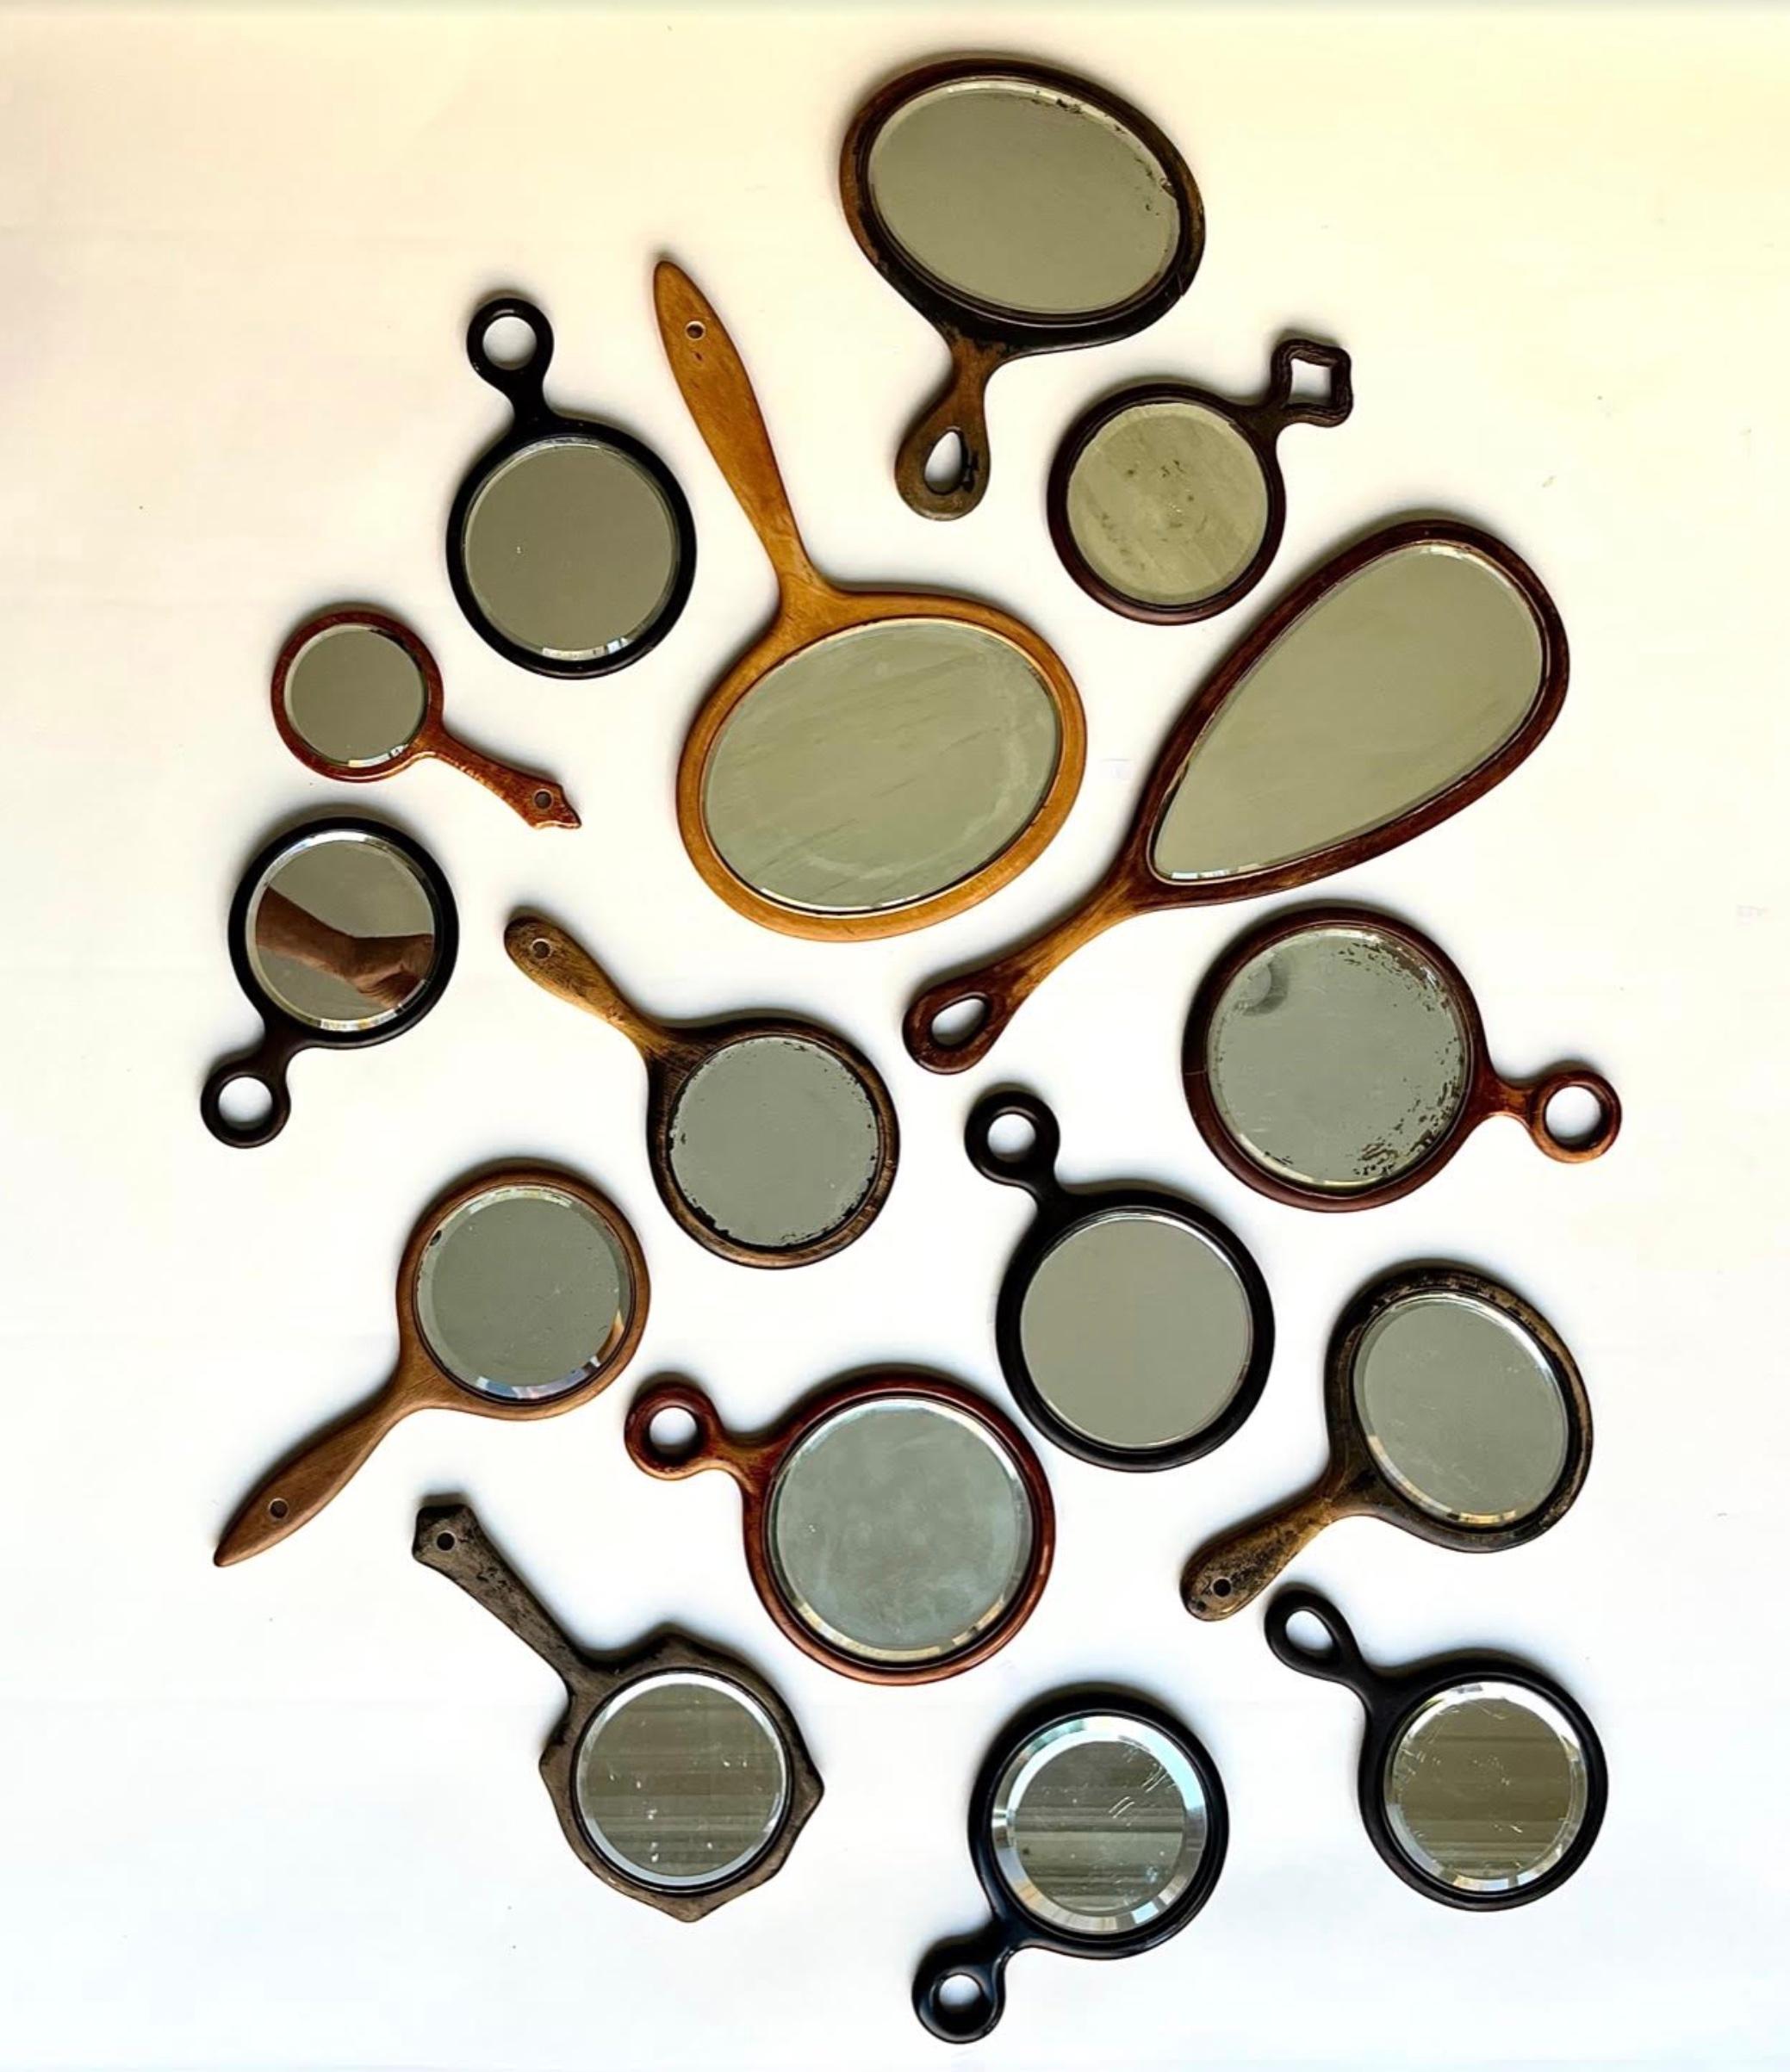 American Craftsman Collection of 16 Antique Hand Mirrors with Beveled Glass